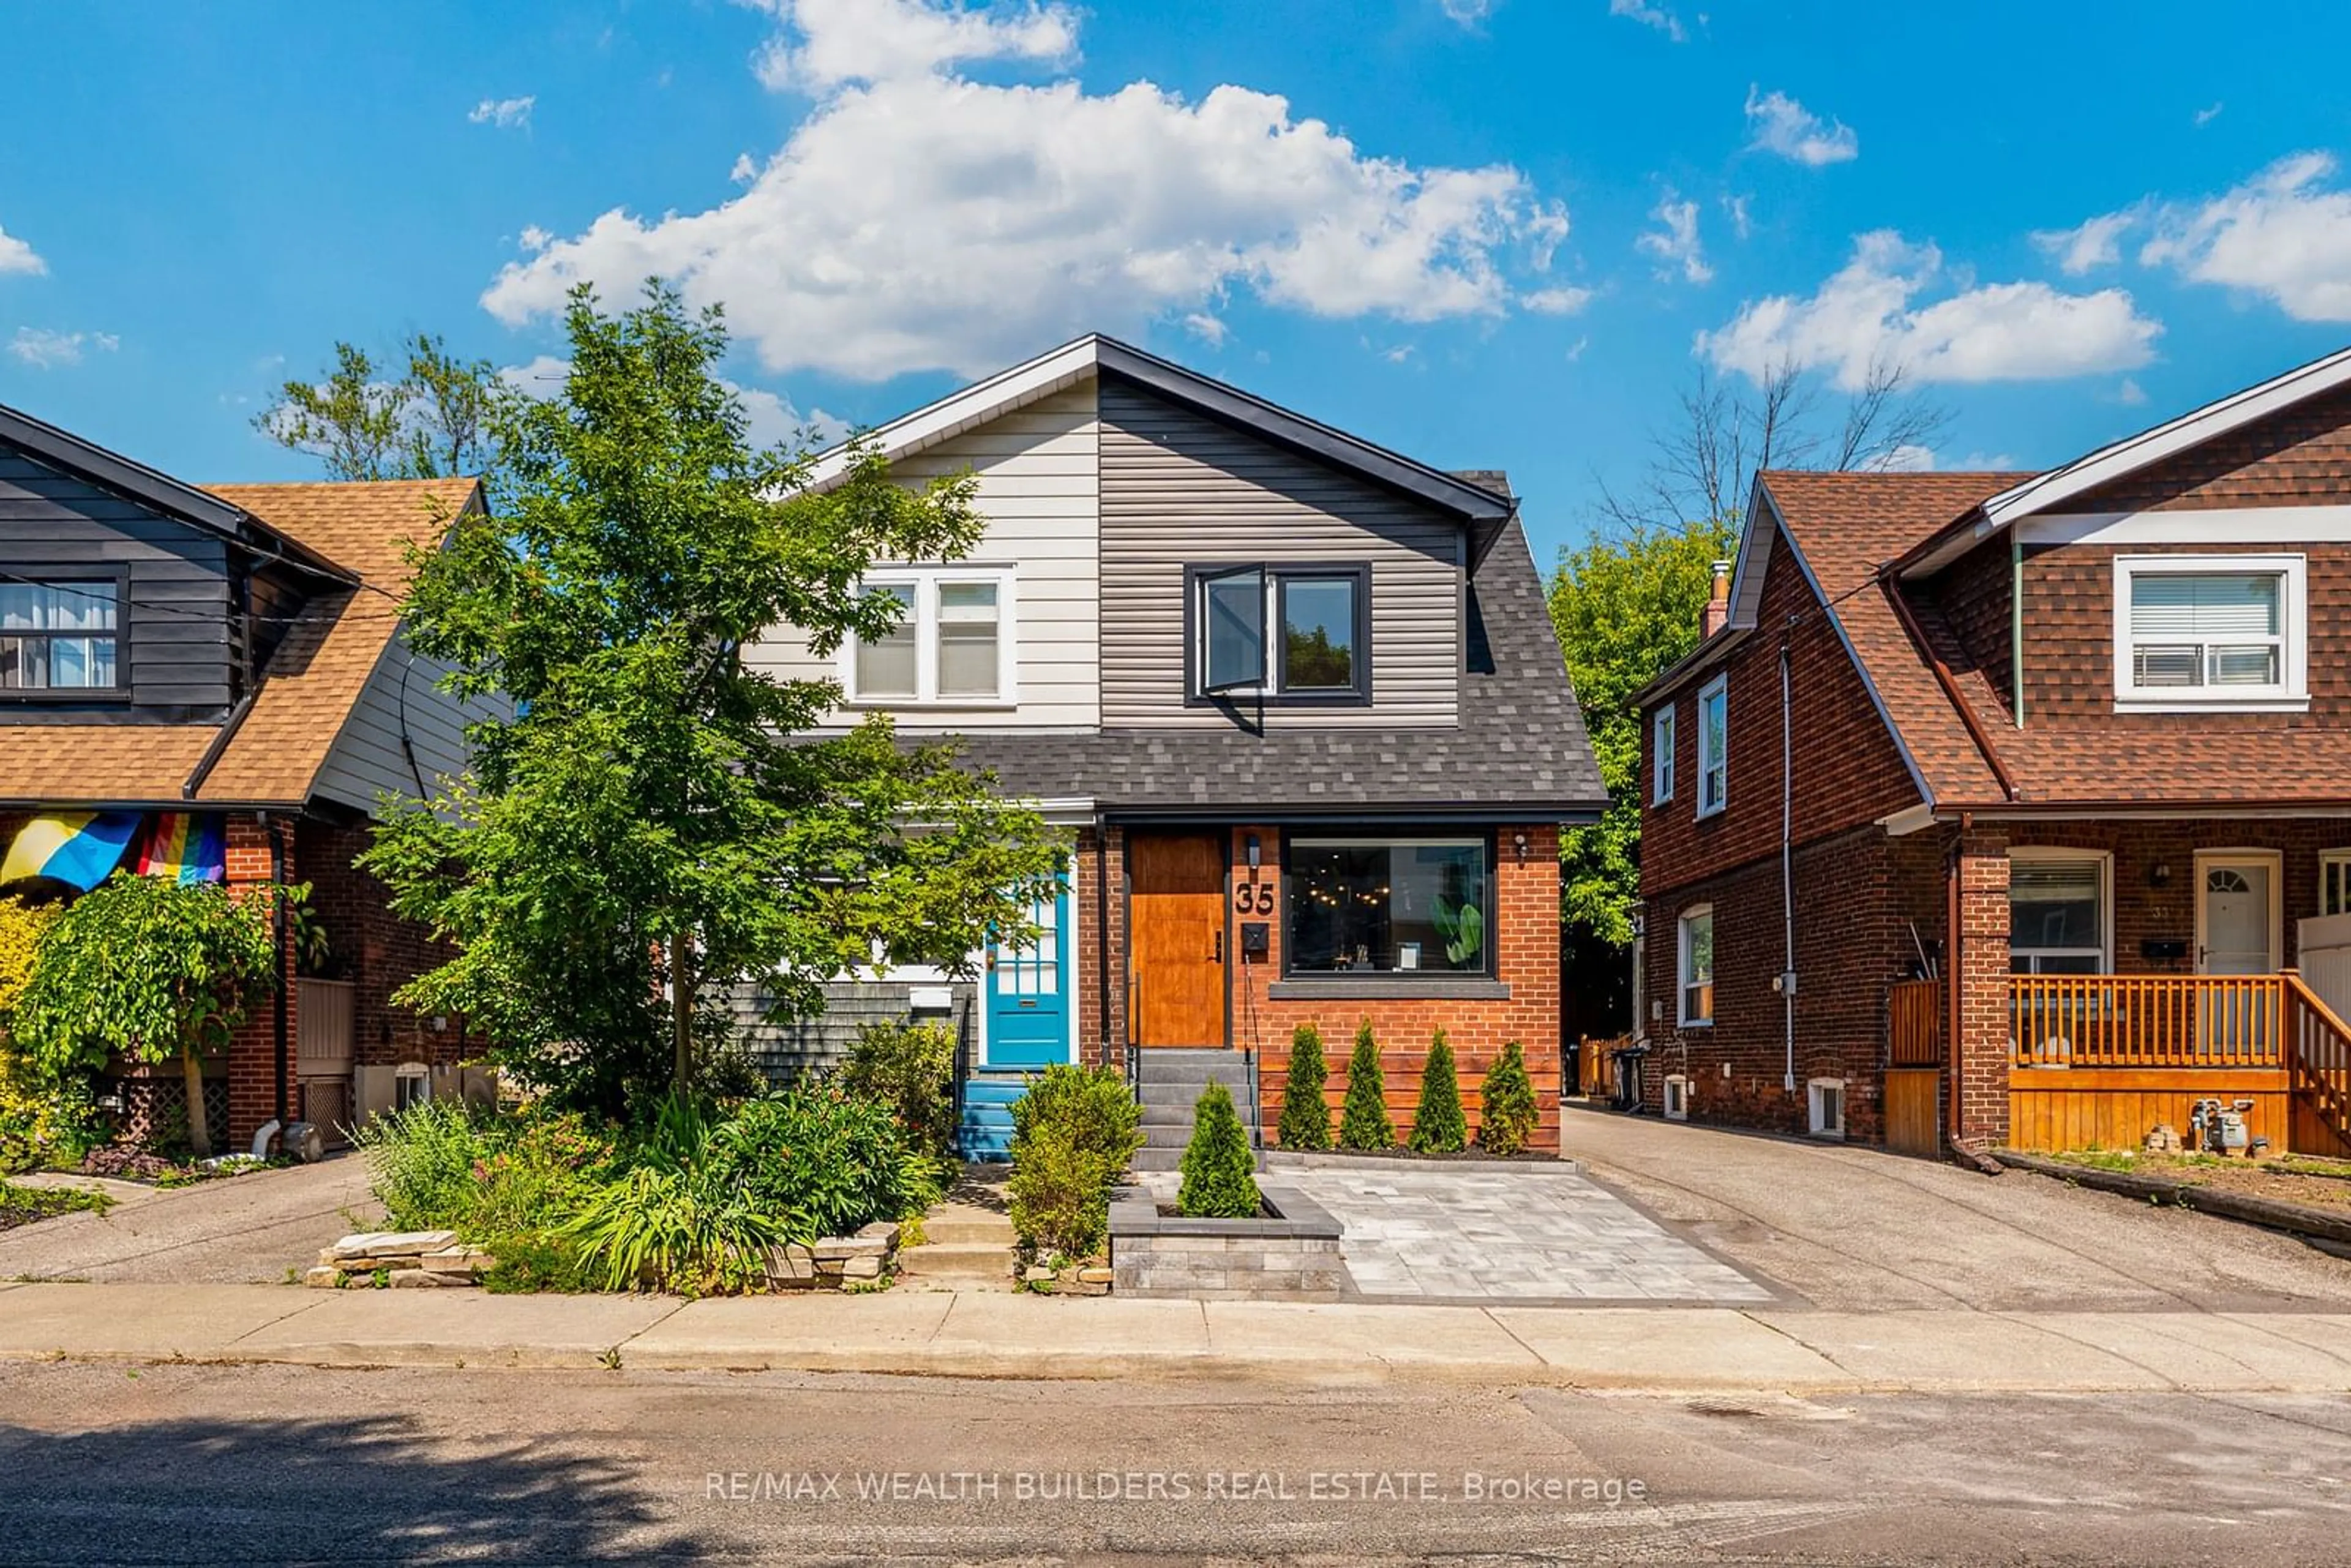 Home with brick exterior material for 35 Hiltz Ave, Toronto Ontario M4L 2N6